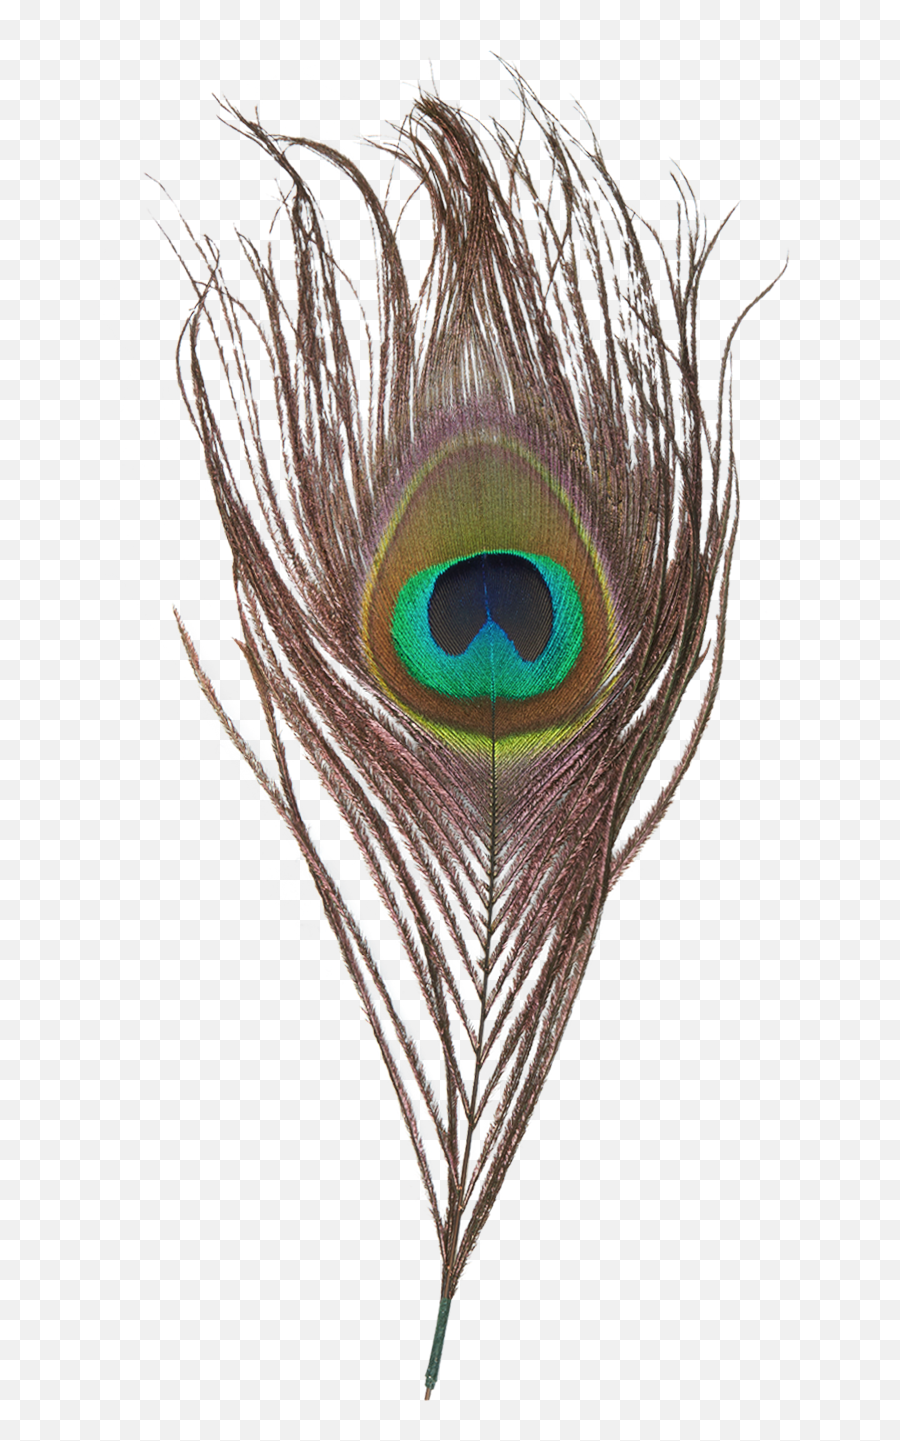 Png Transparent Images - Feather Transparent Background Peacock Png,Peacock Feathers Png